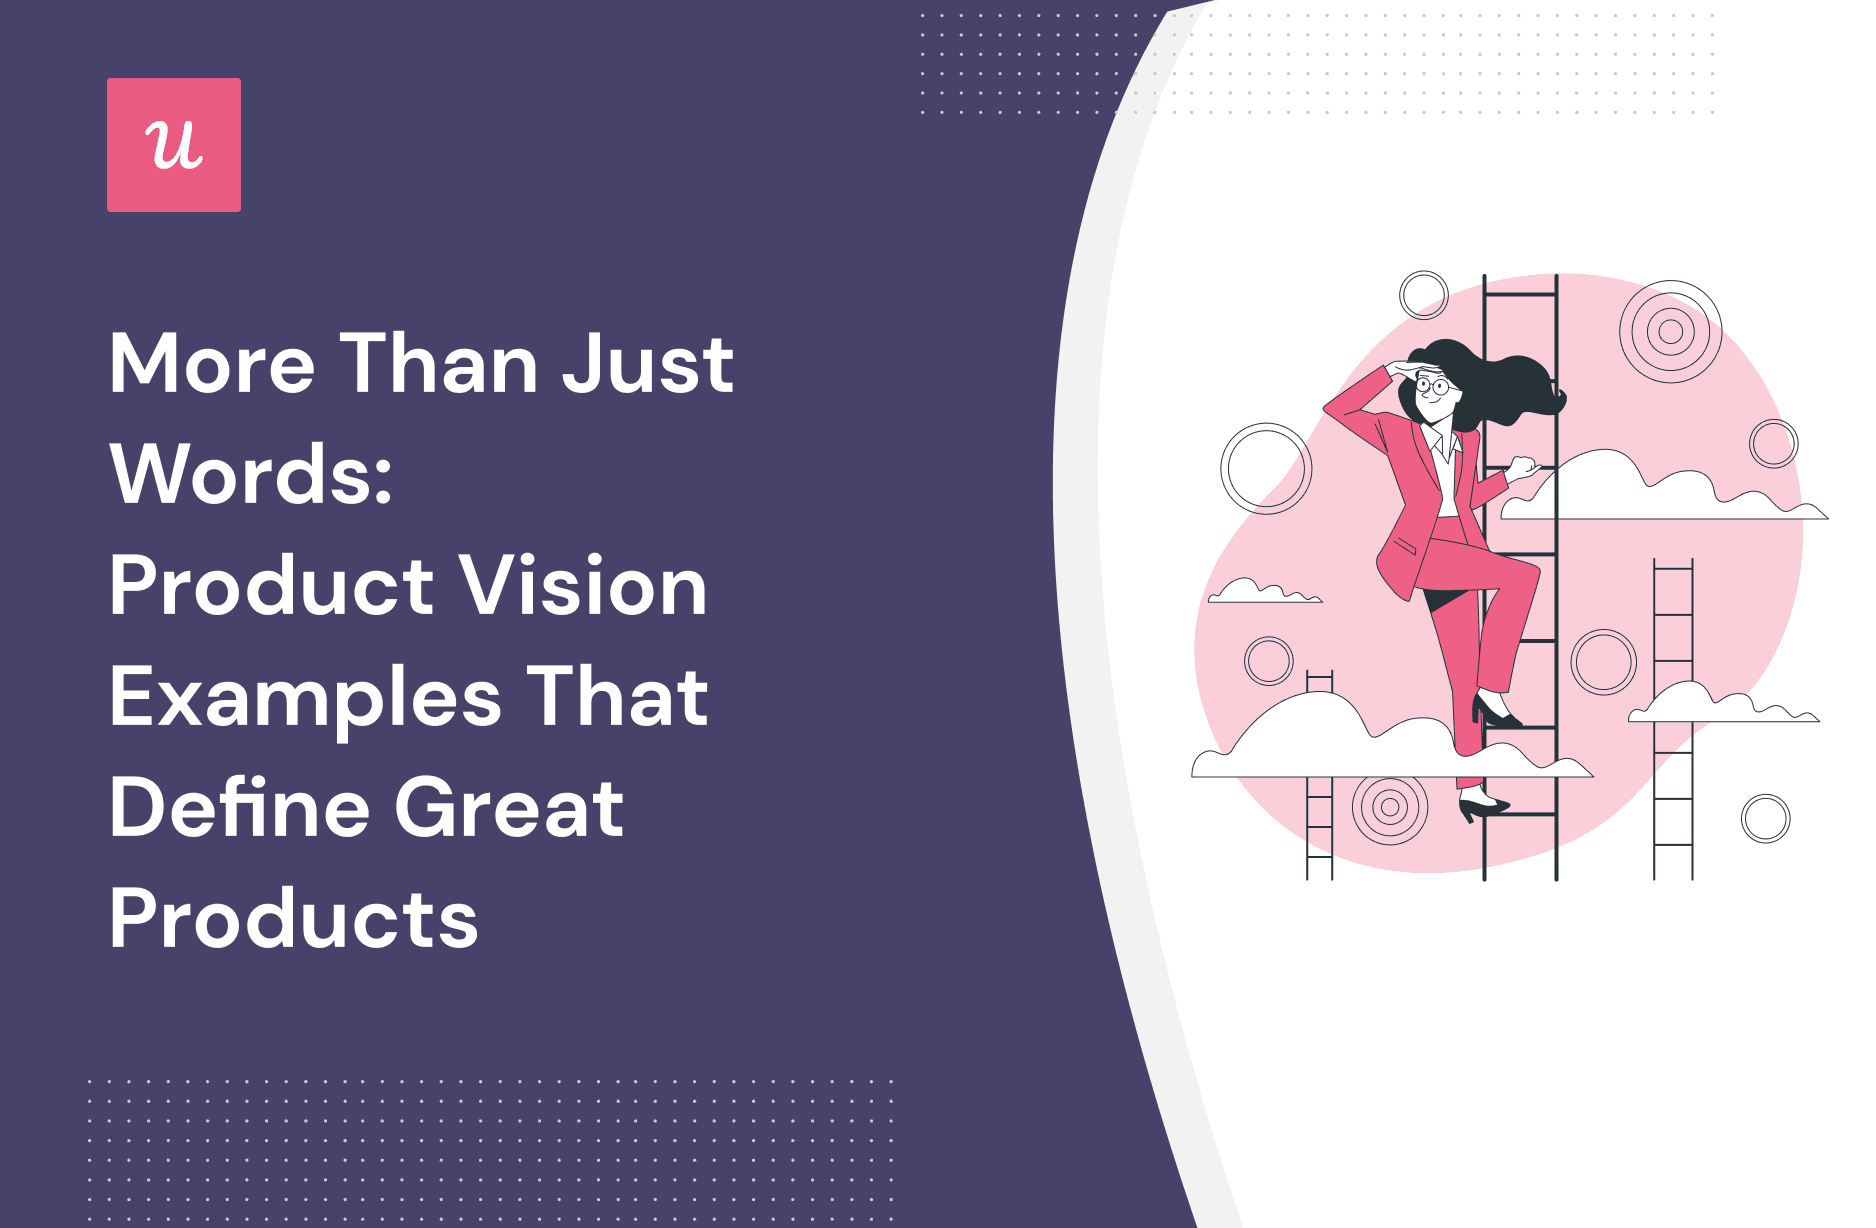 More Than Just Words: Product Vision Examples That Define Great Products cover